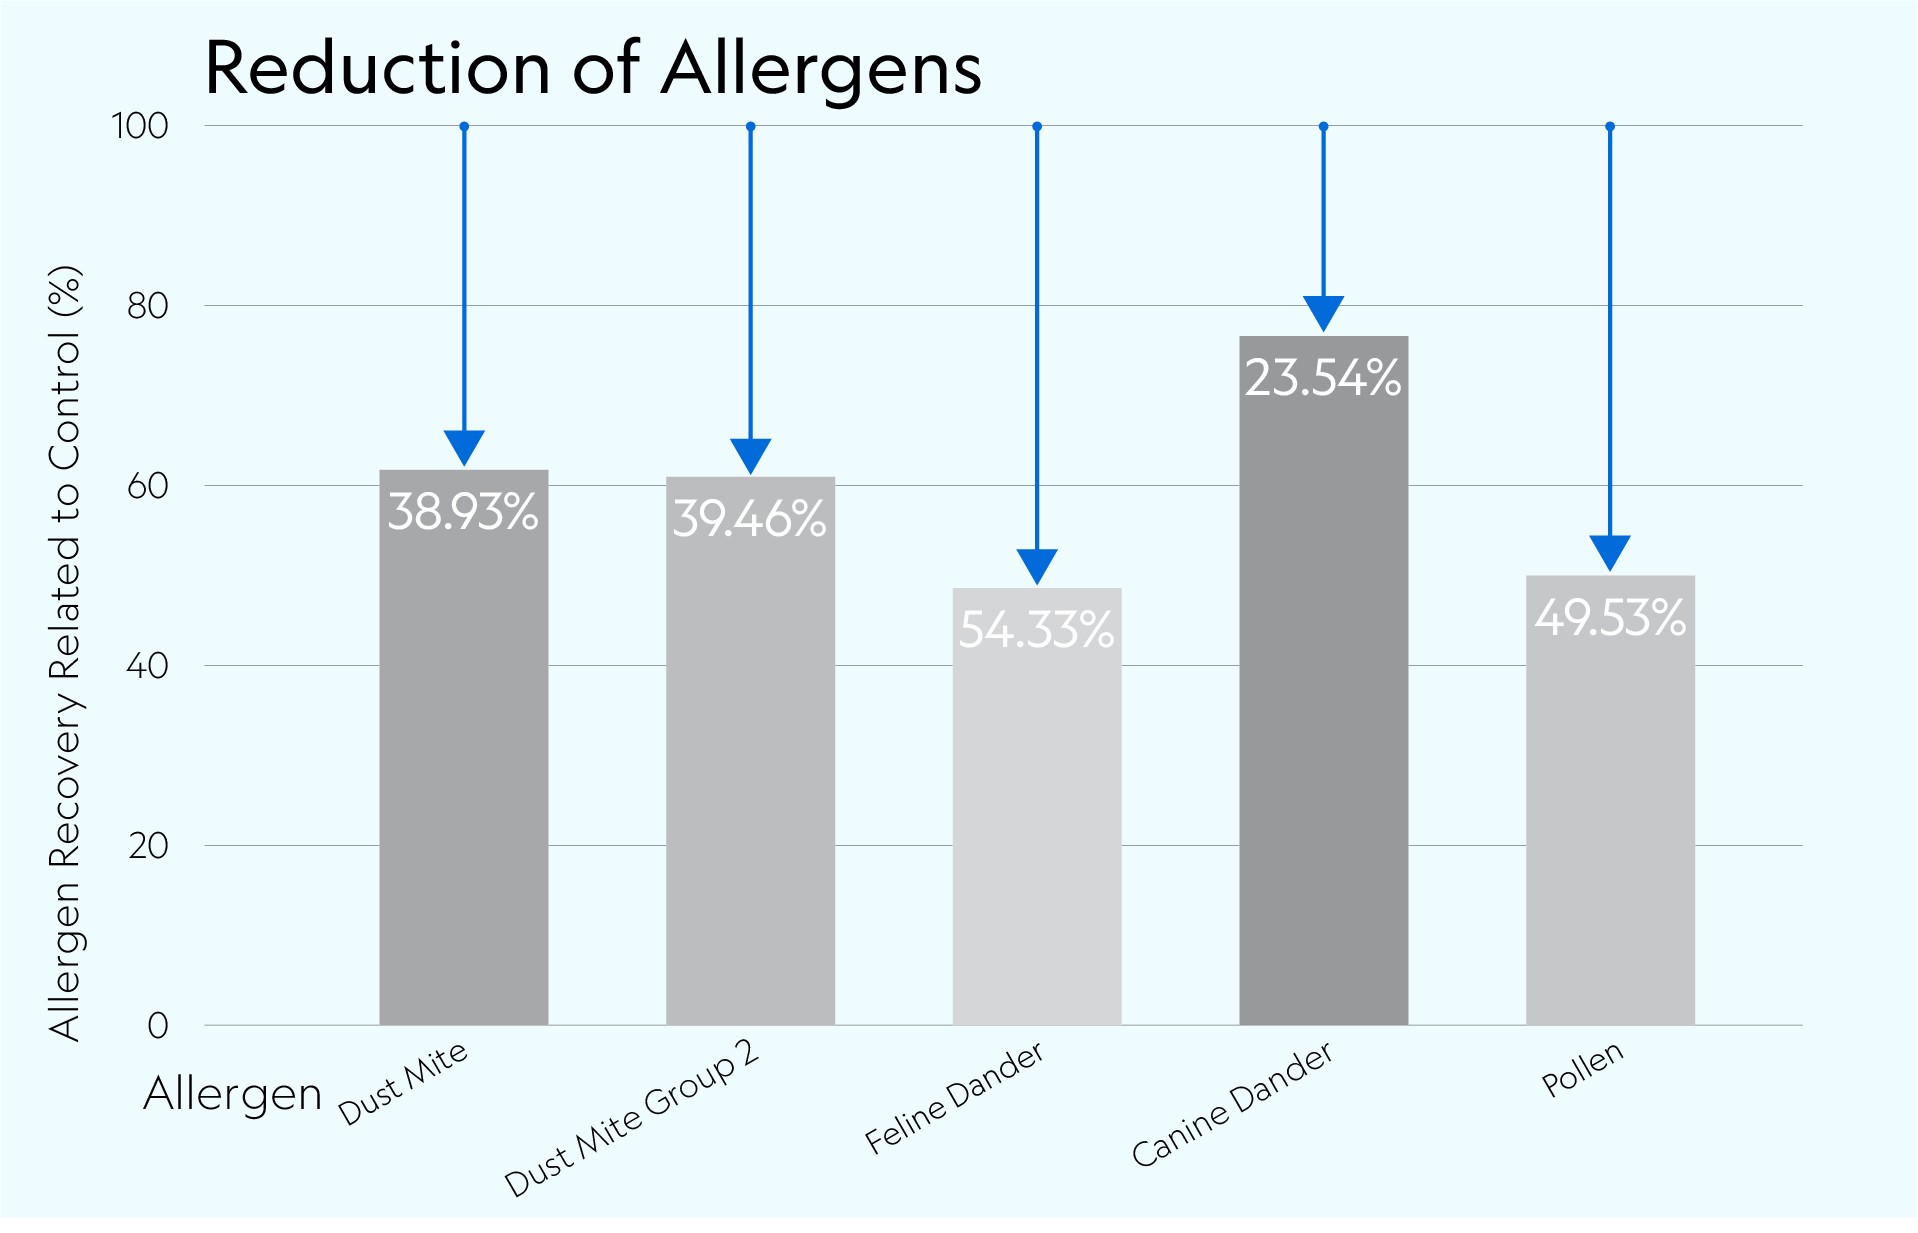 Protect 800/900 - Reduction in Allergens